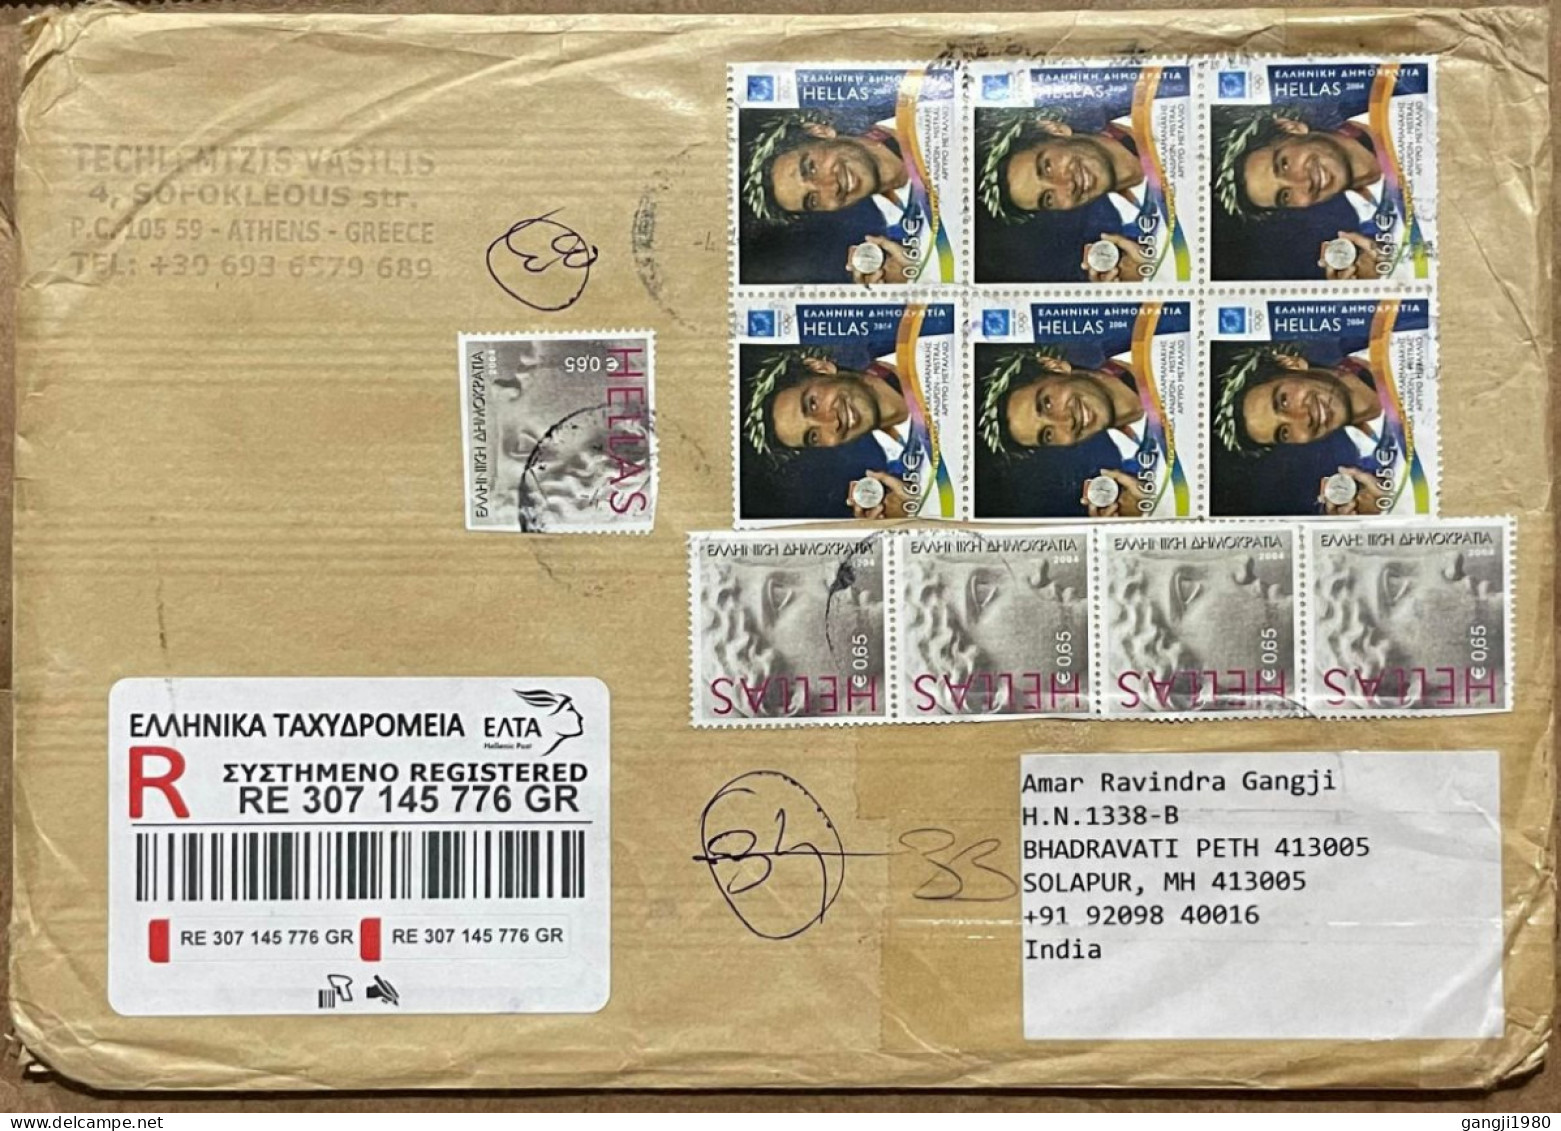 GREECE TO INDIA 2024, REGISTER COVER USED, 11 MULTI STAMP, 2004 ATHENS OLYMPIC, NIKOS KAKLAMANAKIS SILVER MEDAL,WINDSURF - Lettres & Documents